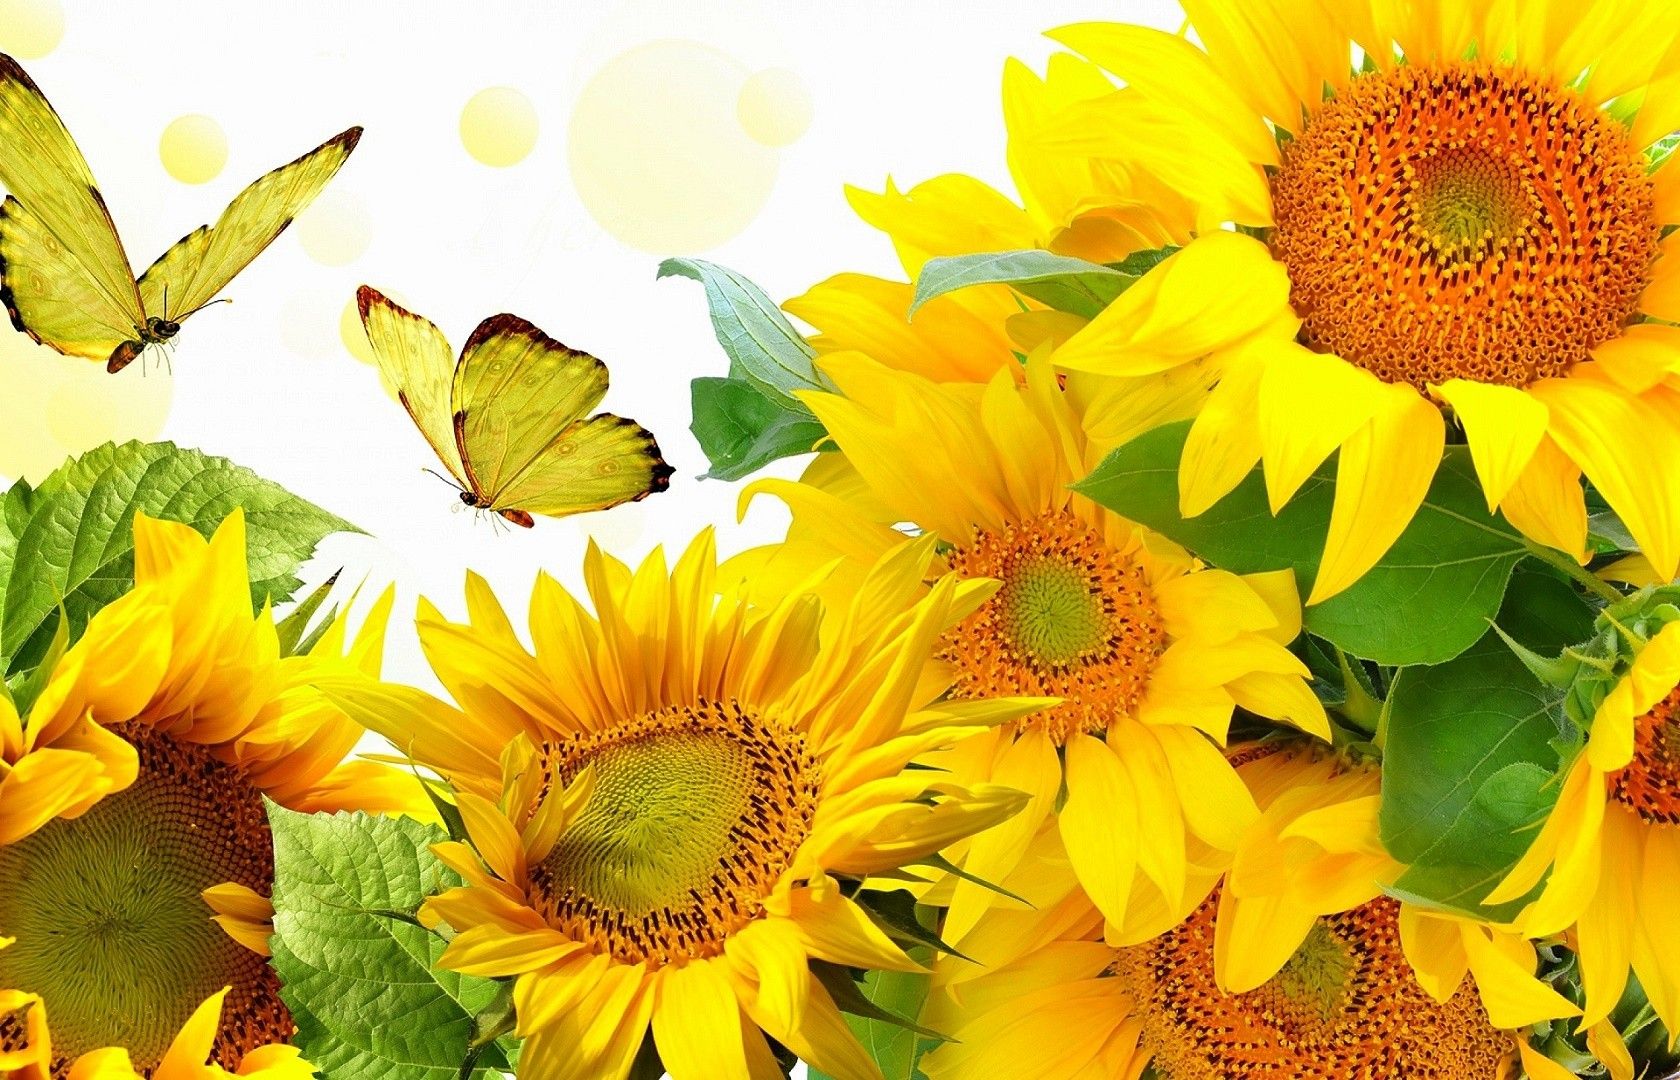 Sunflowers and Butterflies Wallpapers.